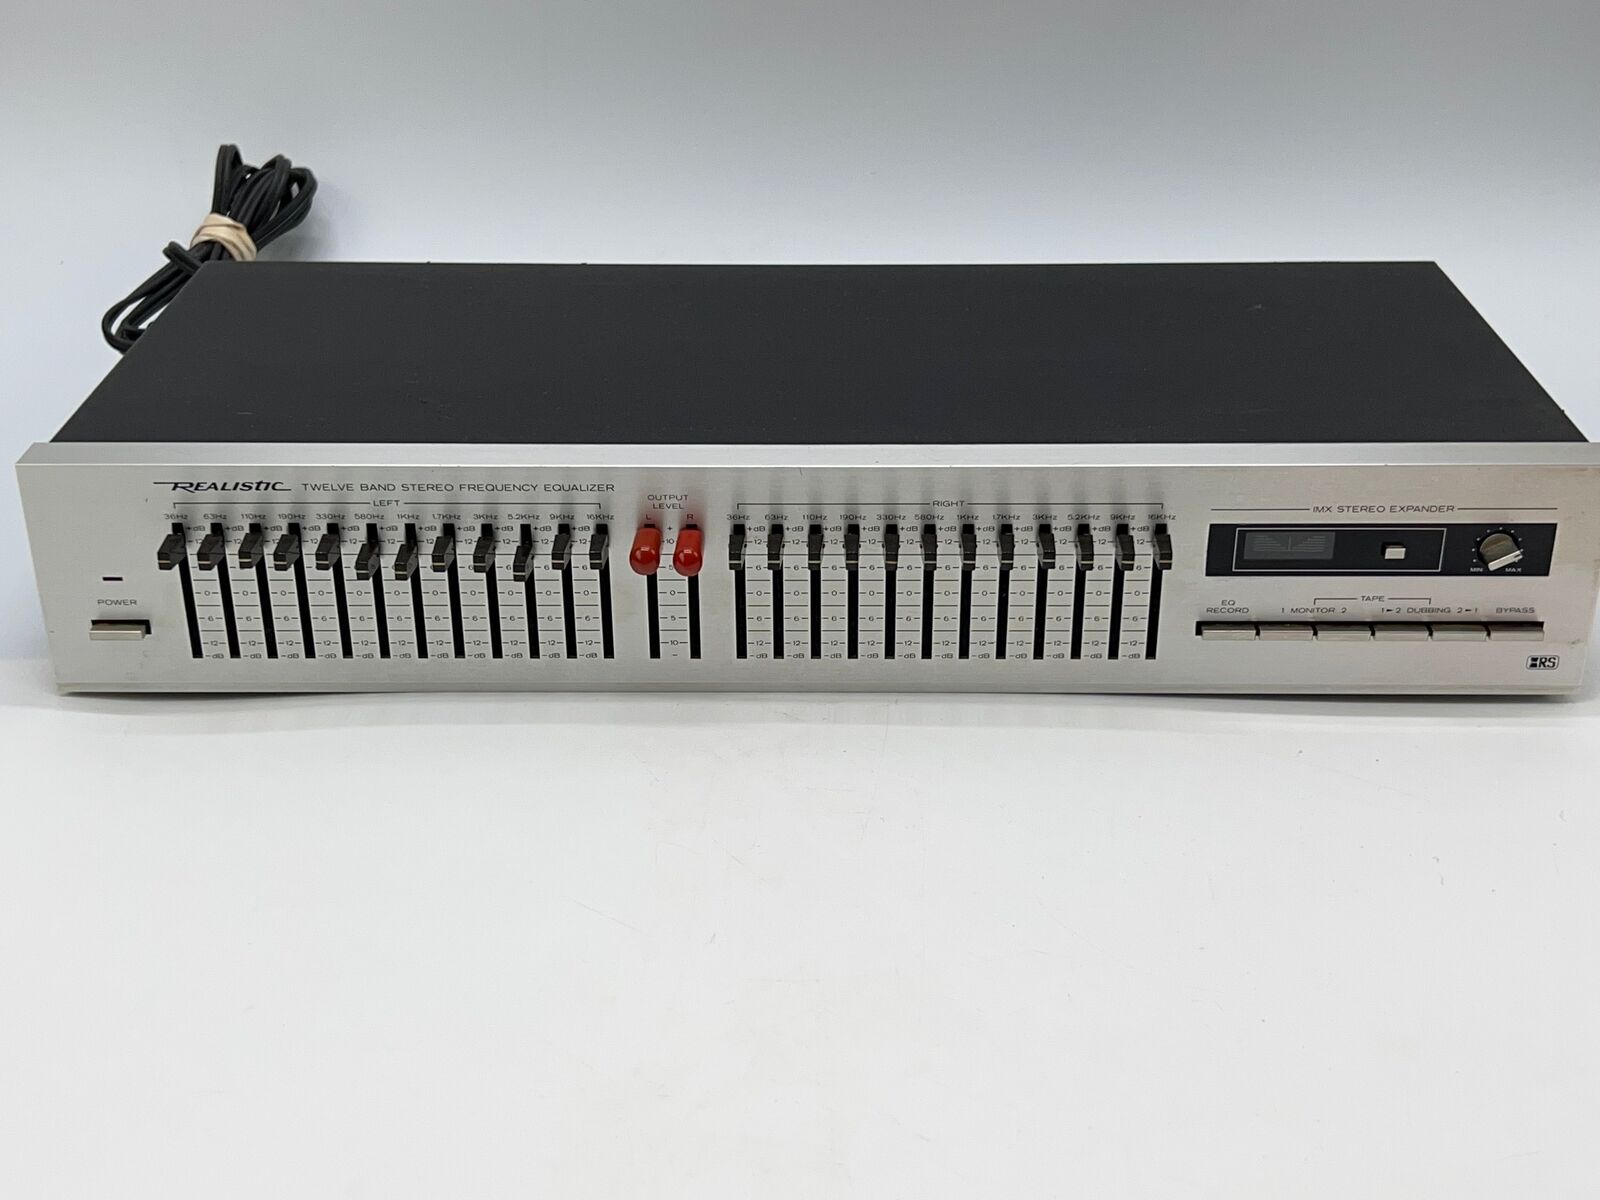 Vintage Realistic 31-2010 Twelve Band Stereo Frequency Equalizer